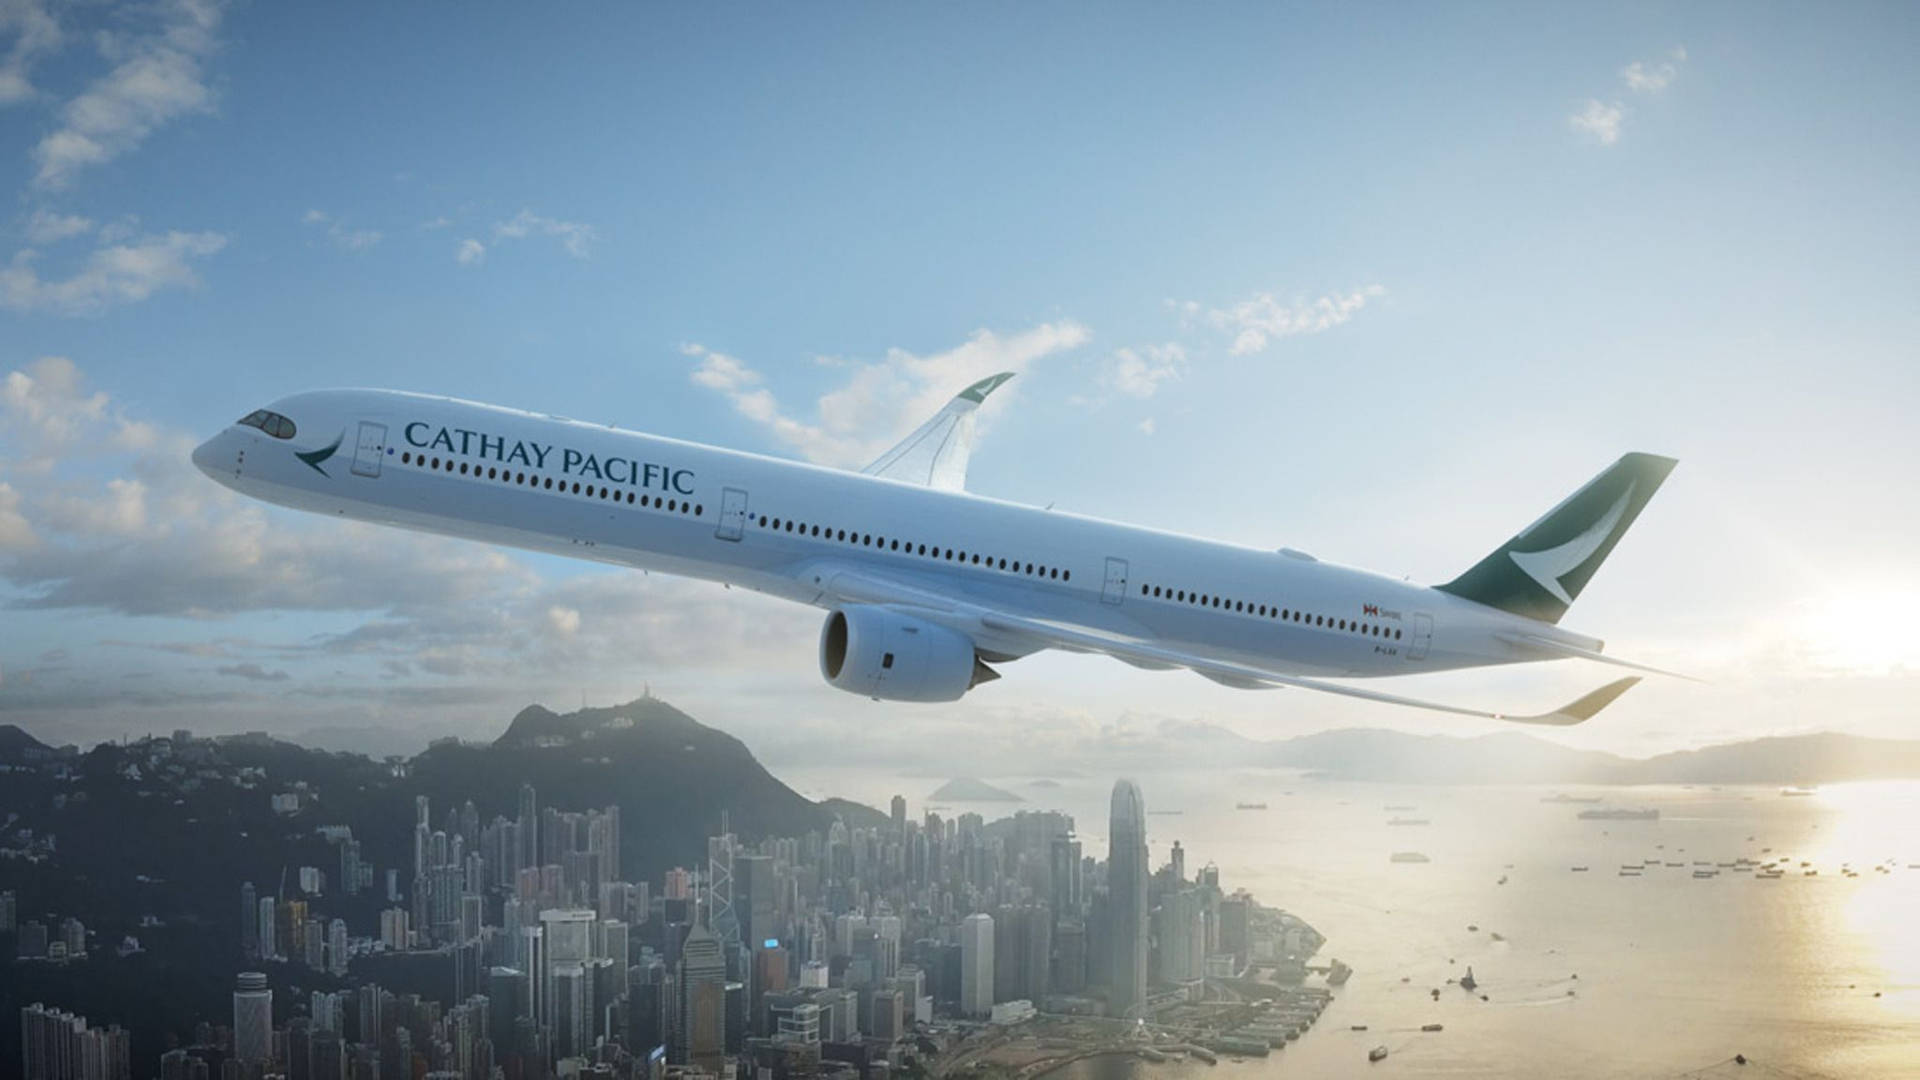 Cathay Pacific City Plane Wallpaper